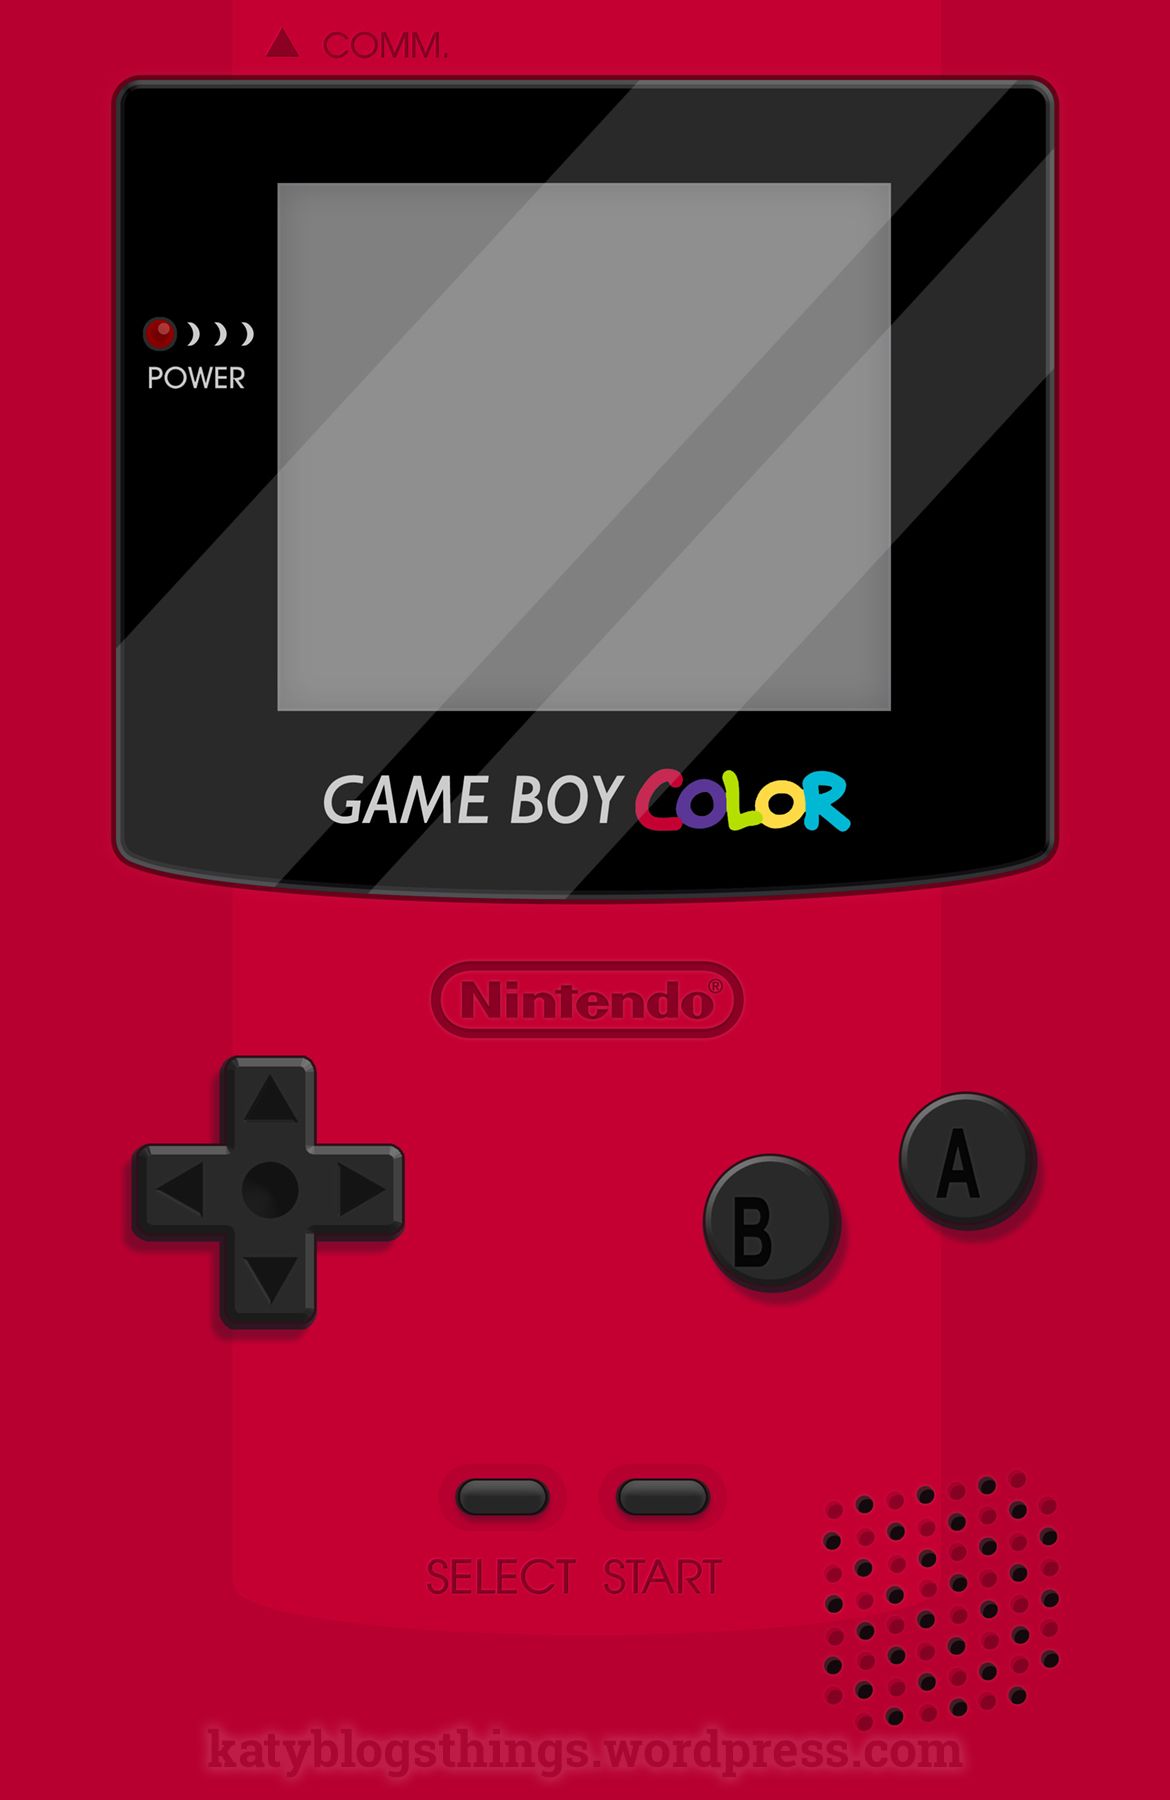 Gameboy Color 2.0' iPhone 12 by katymakesthings. Gameboy, Minecraft banner designs, Yellow iphone case